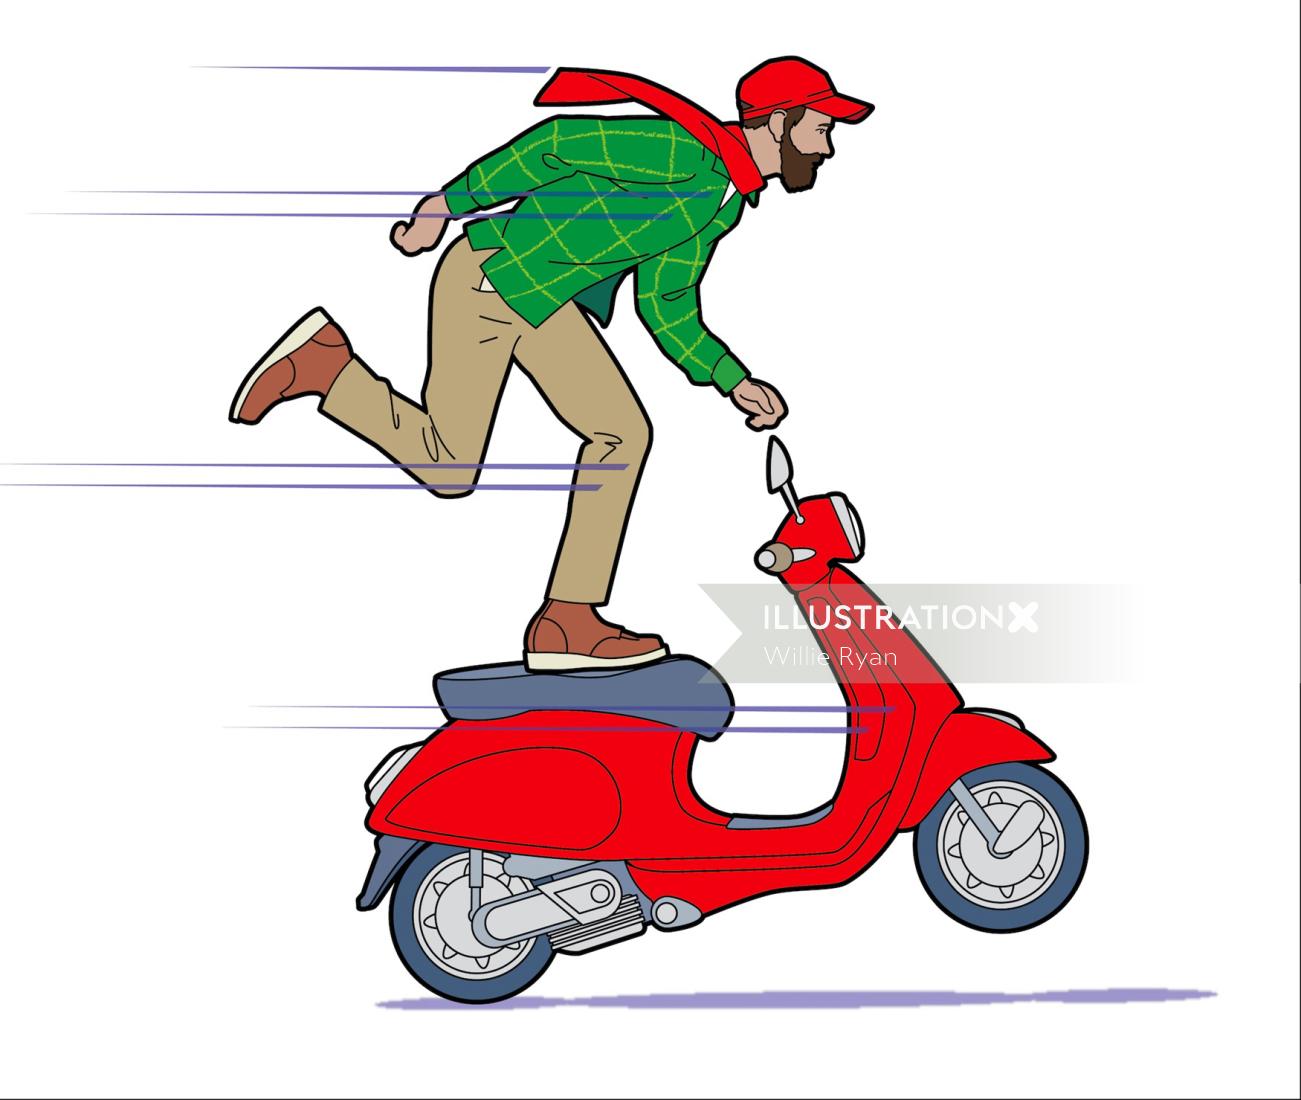 scooter, homme sur scooter, vespa, équilibrage homme, scooter rouge, joy ride, hipster